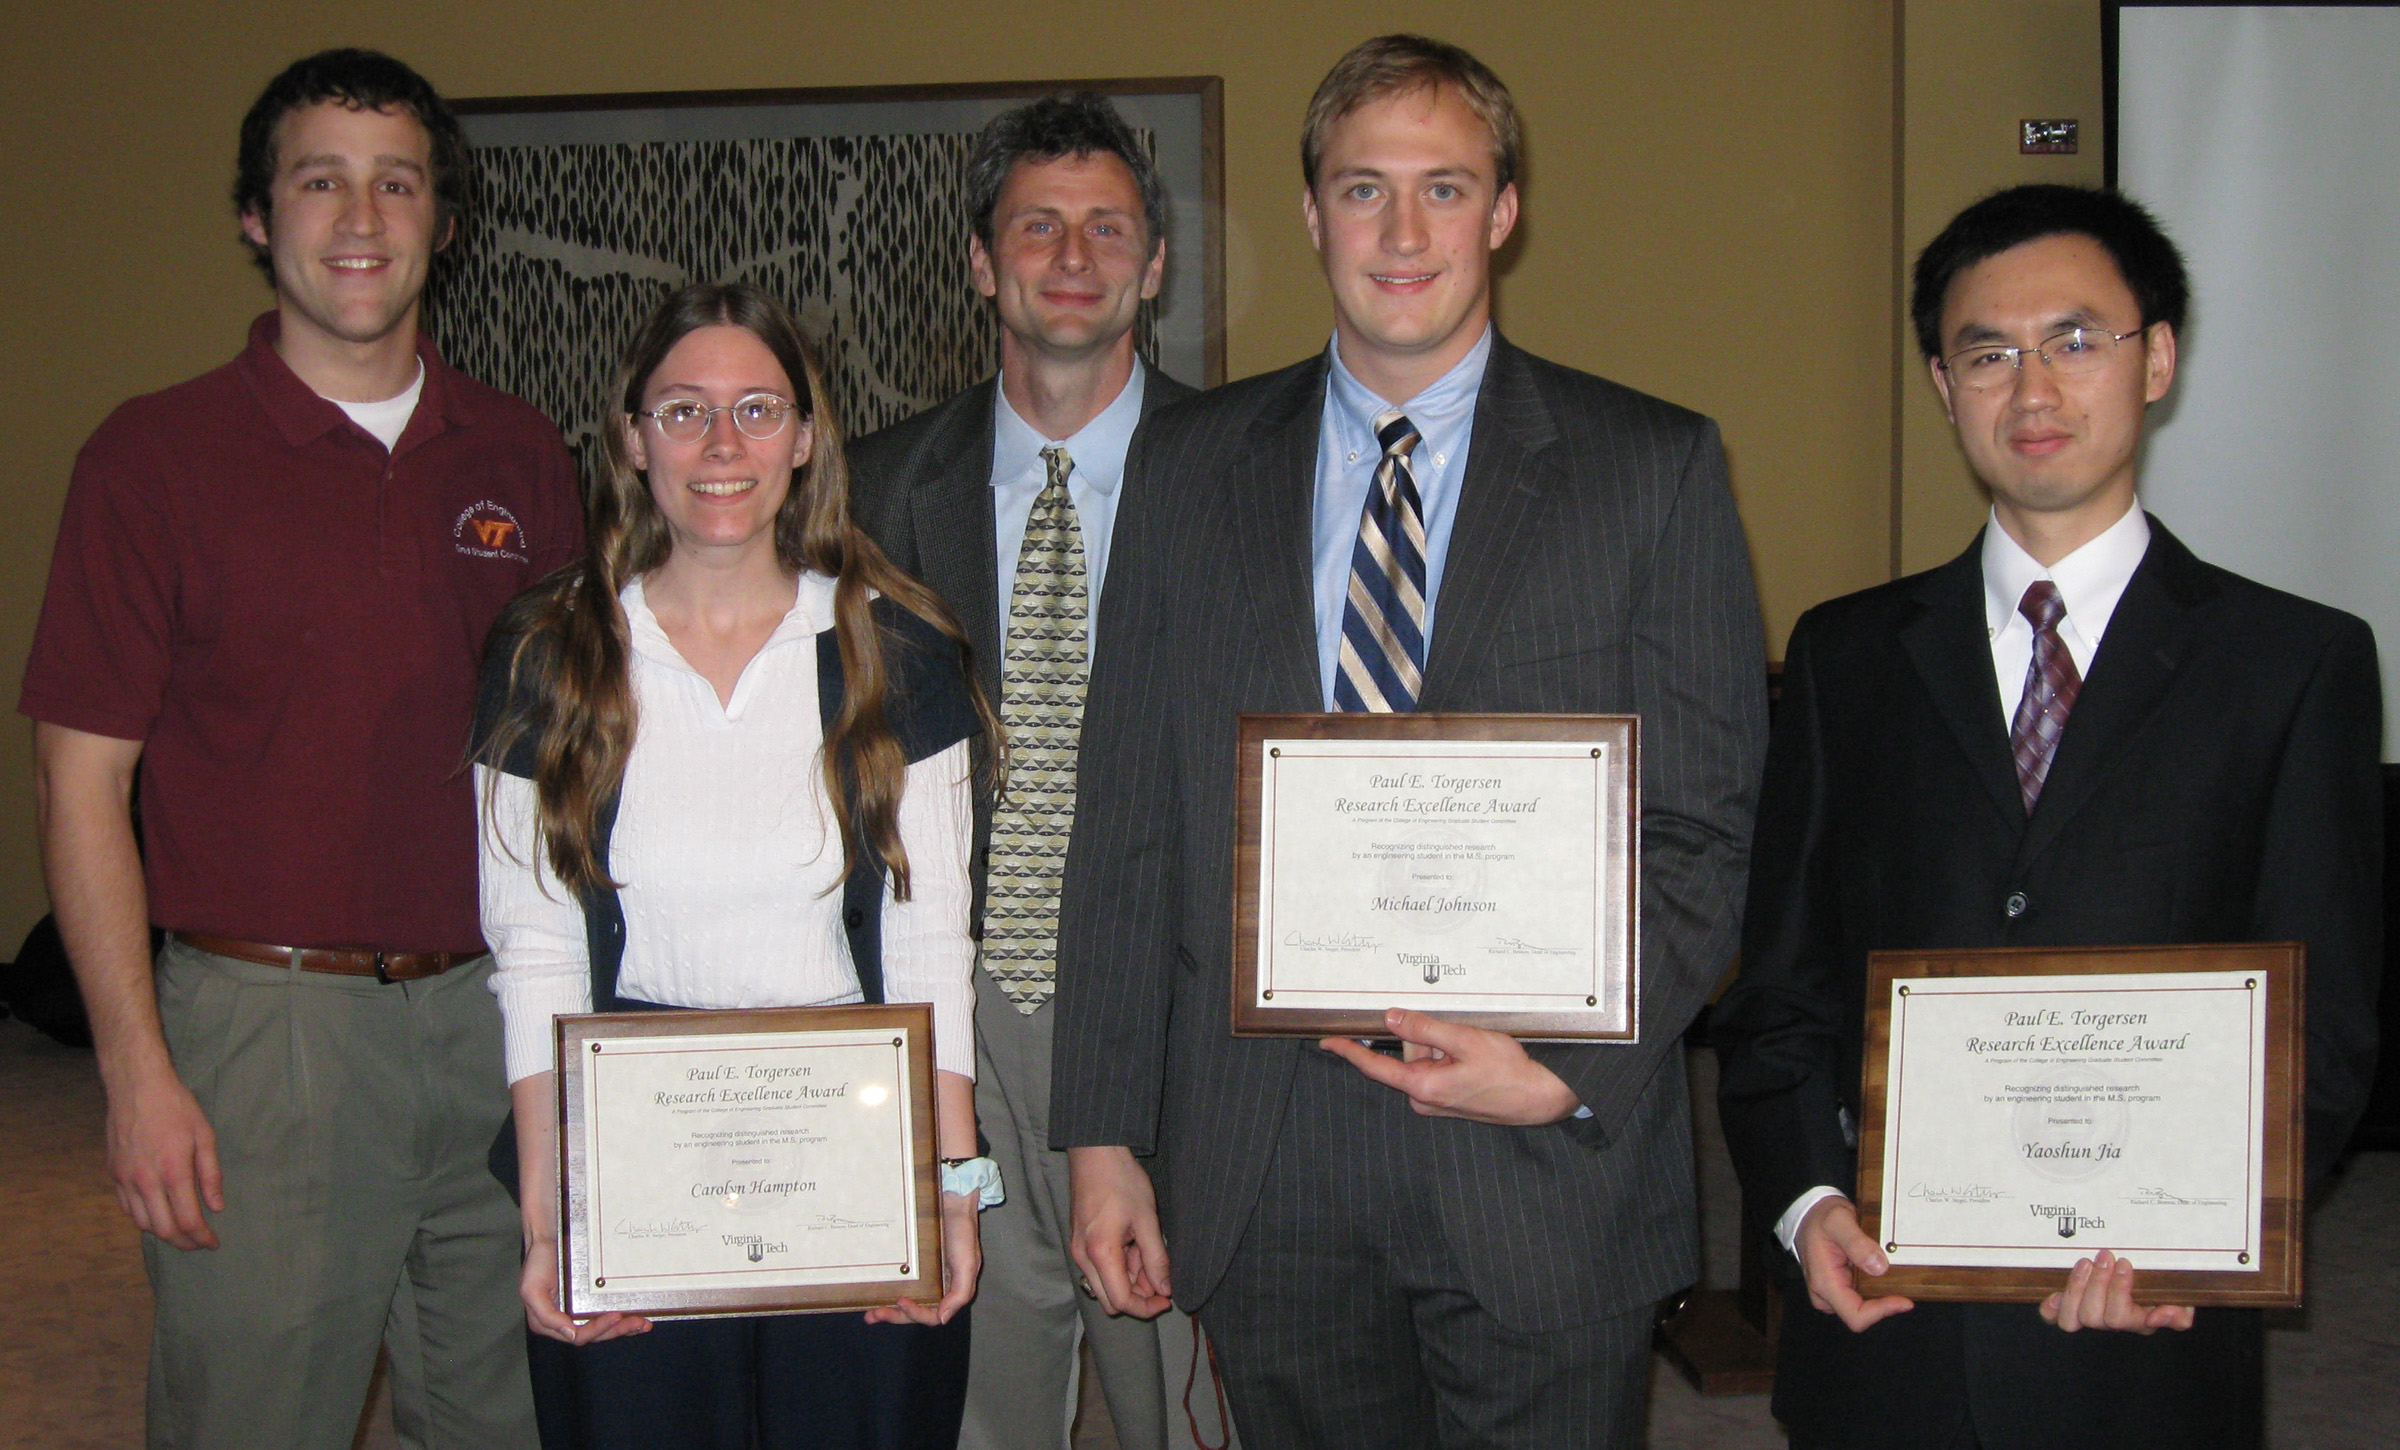 Left to right: Eric Williams, chairman of the Torgersen Awards Committee and a member of the College of Engineering Graduate Student Committee; Carolyn Hampton, a master's student in biomedical engineering; Don Leo, associate dean of research and graduate studies with the College of Engineering; Michael Johnson, a master's student in biological systems engineering; and Yaoshun Jia, a master's student in electrical and computer engineering.